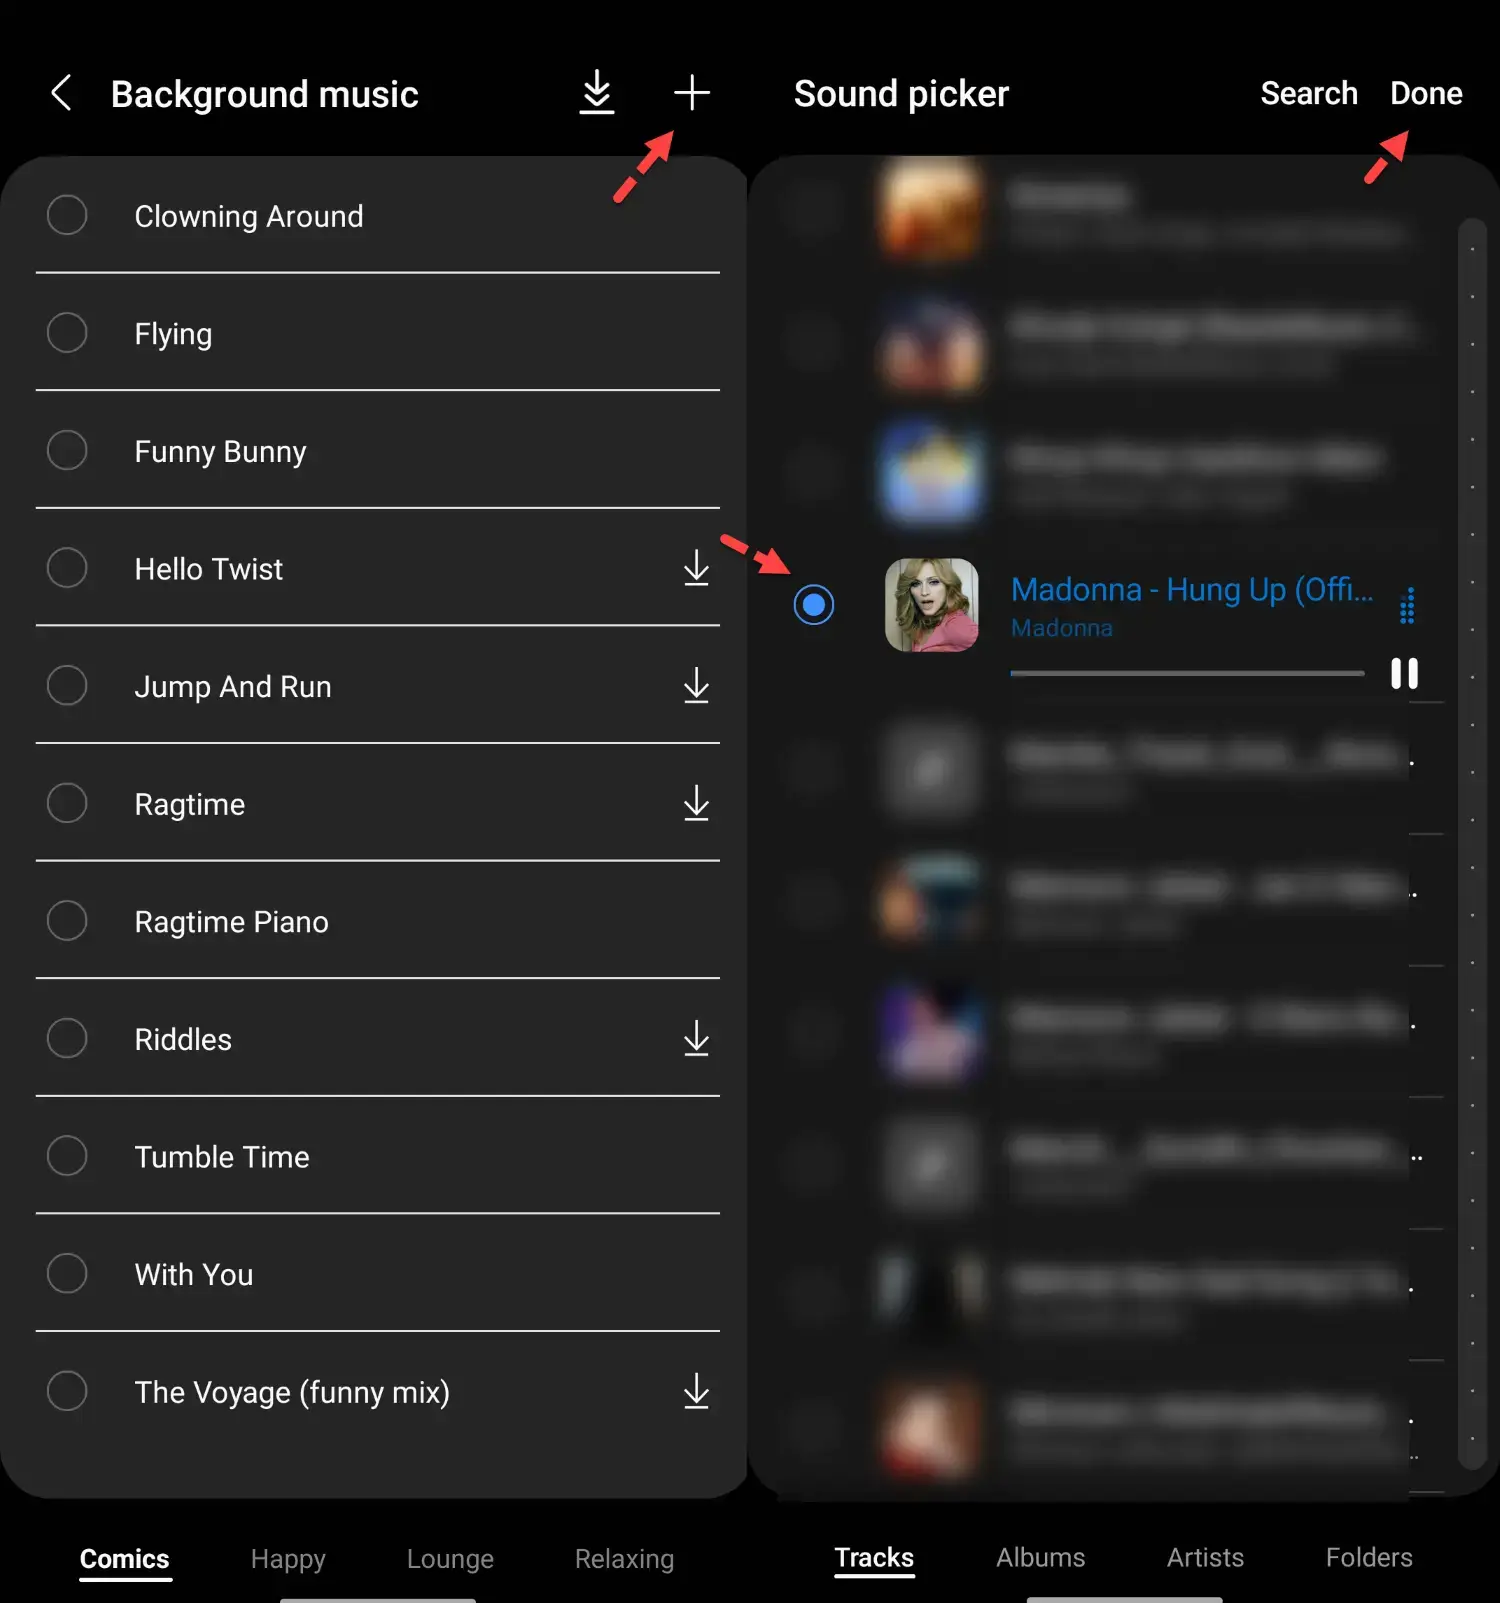 How to Add Background Music to an Existing Video on Samsung